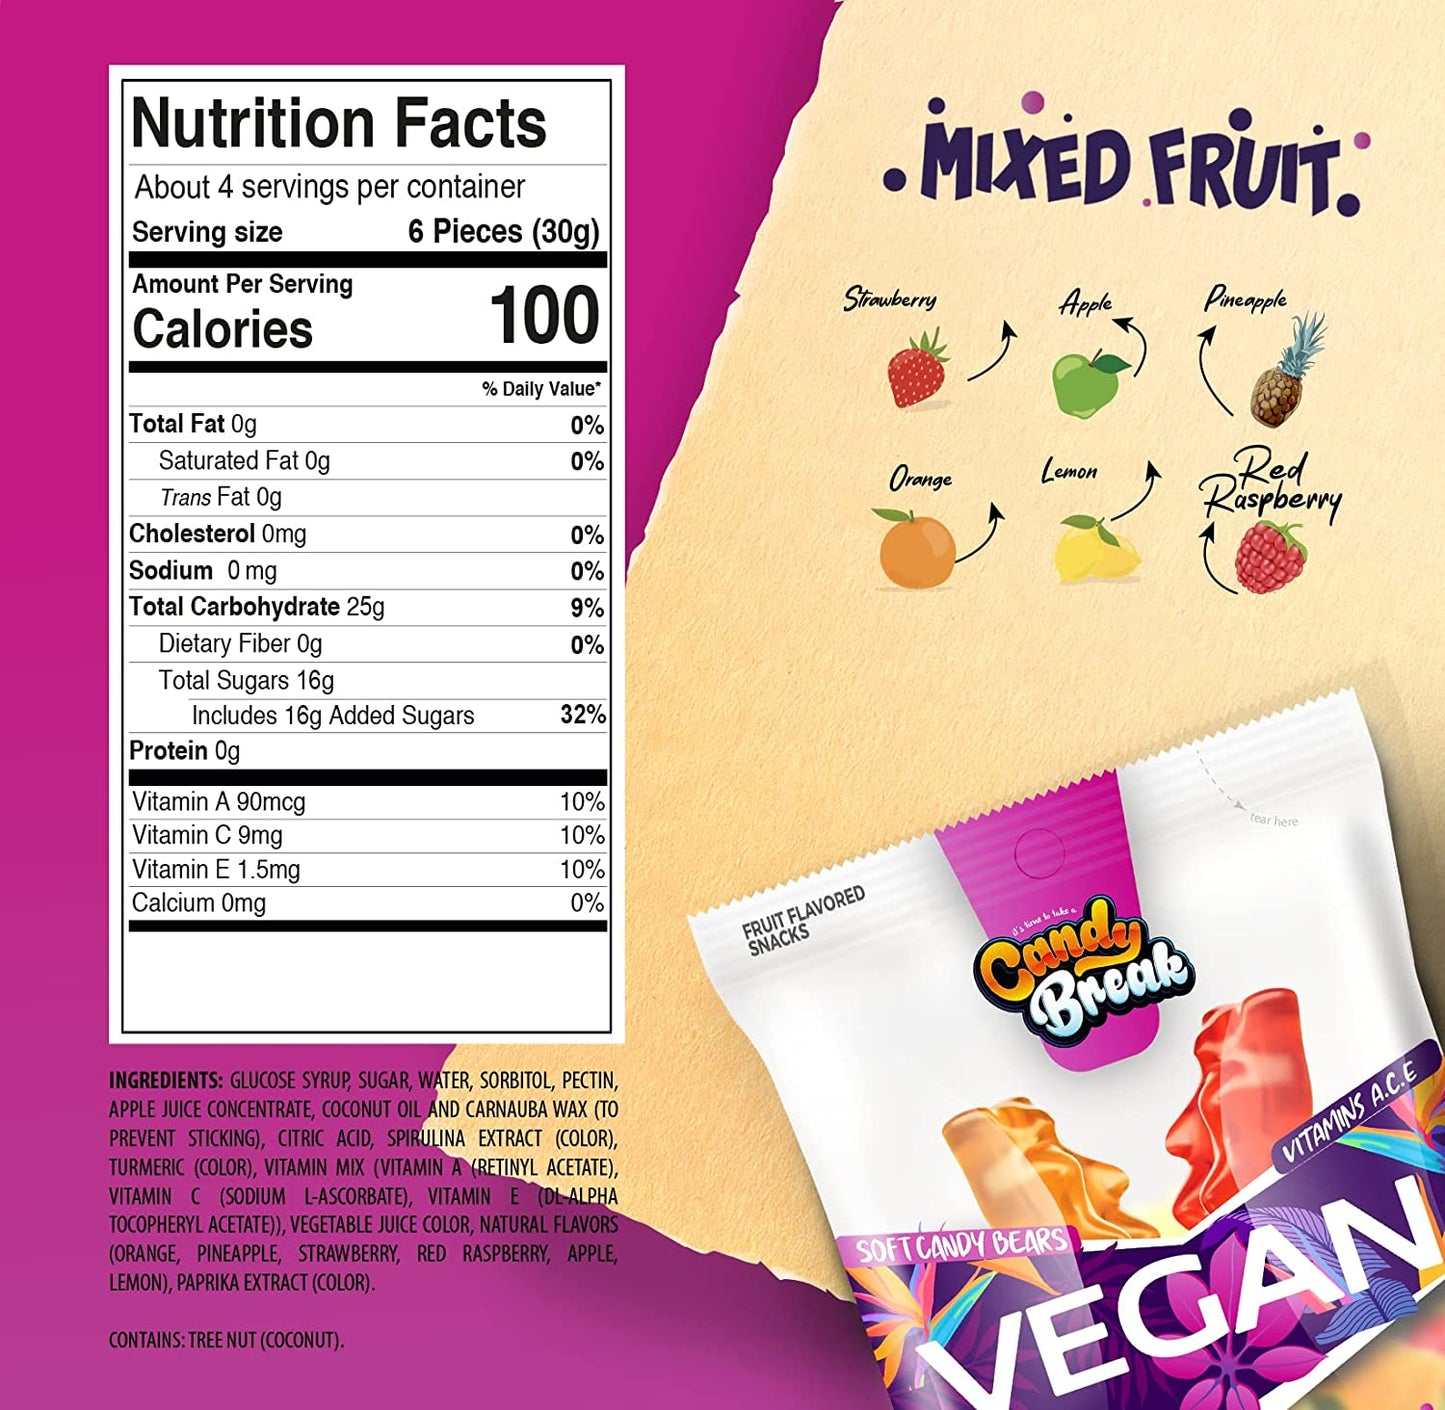 Mixed Fruit Flavored Vegan Soft Candy (Vegan Society Certified, Pack of 12)